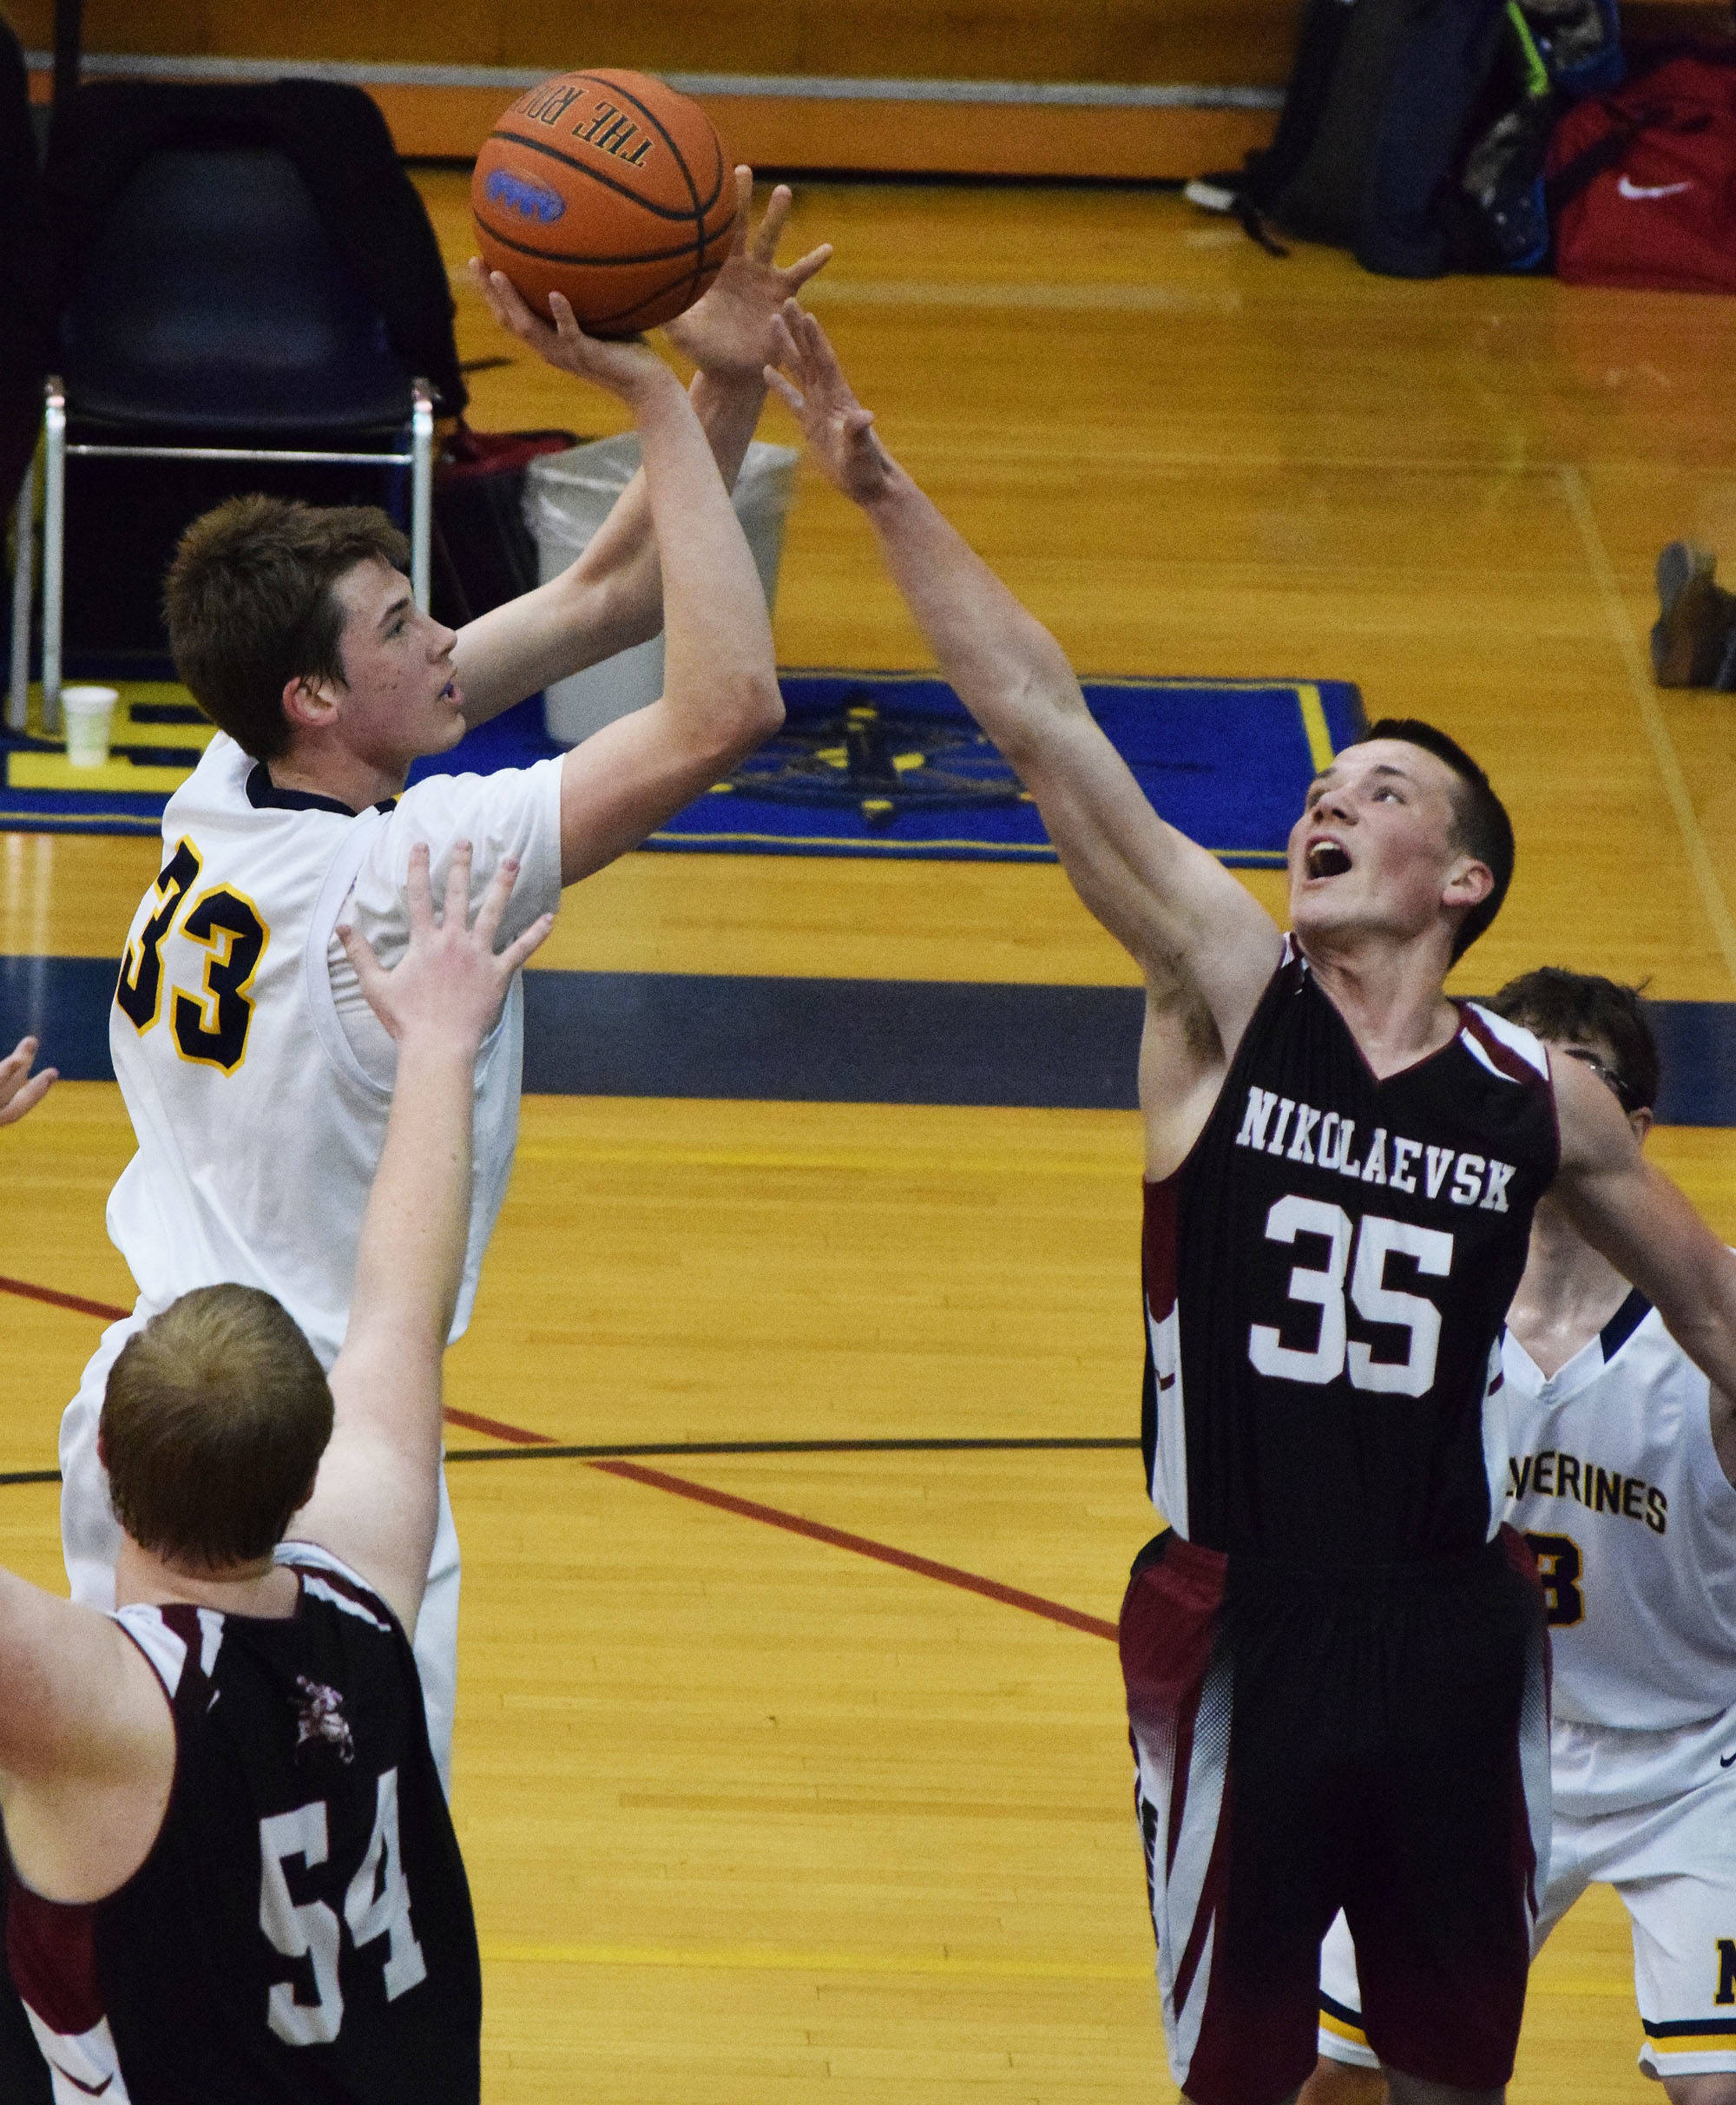 Nikolaevsk’s Zachary Trail (35) puts a hand up on NInilchik’s Austin White in Friday’s Peninsula Conference boys championship game at Homer High School. (Photo by Joey Klecka/Peninsula Clarion)